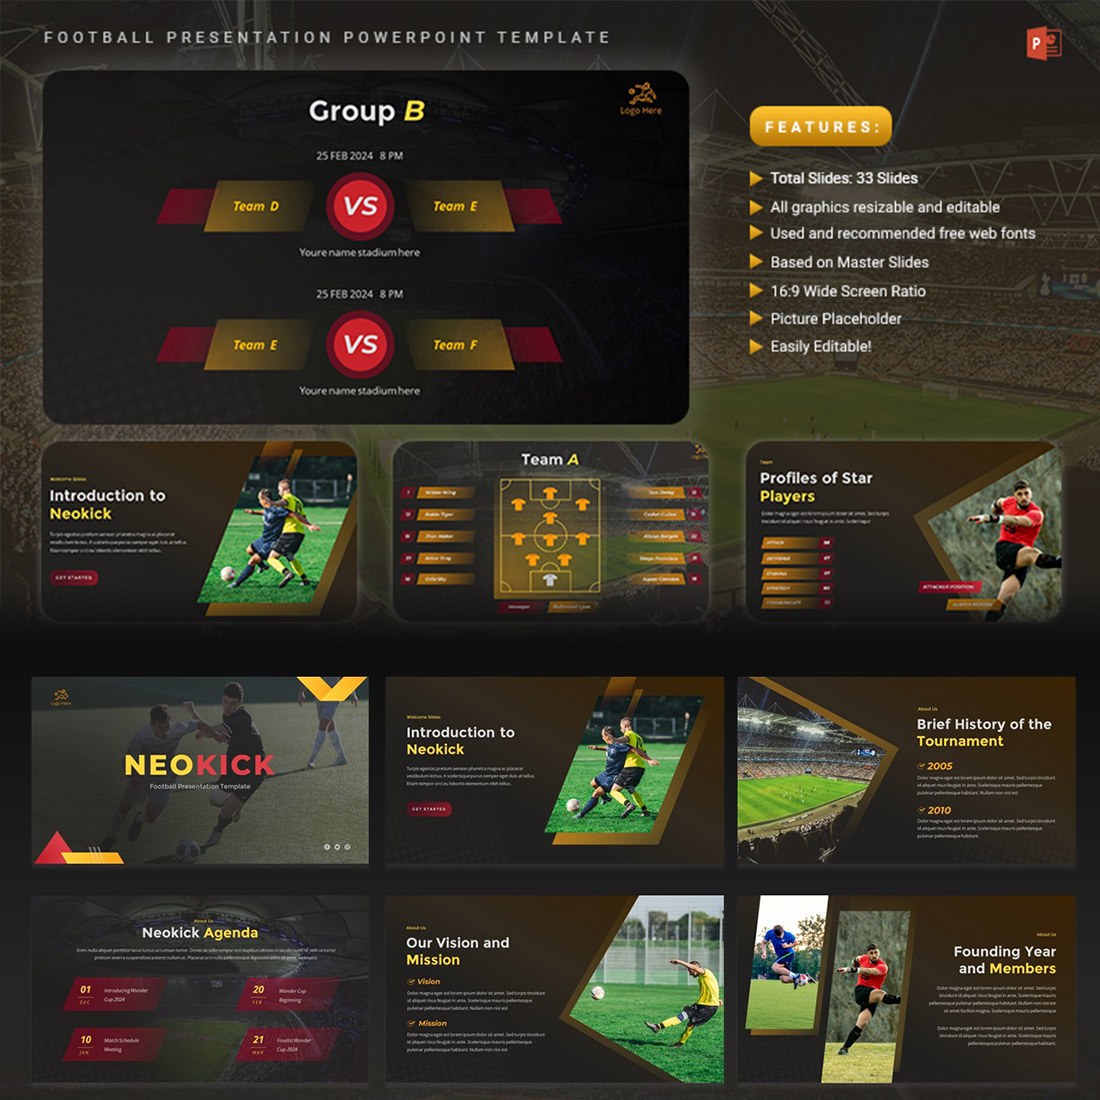 Neokick - Football Presentation PowerPoint Template cover image.